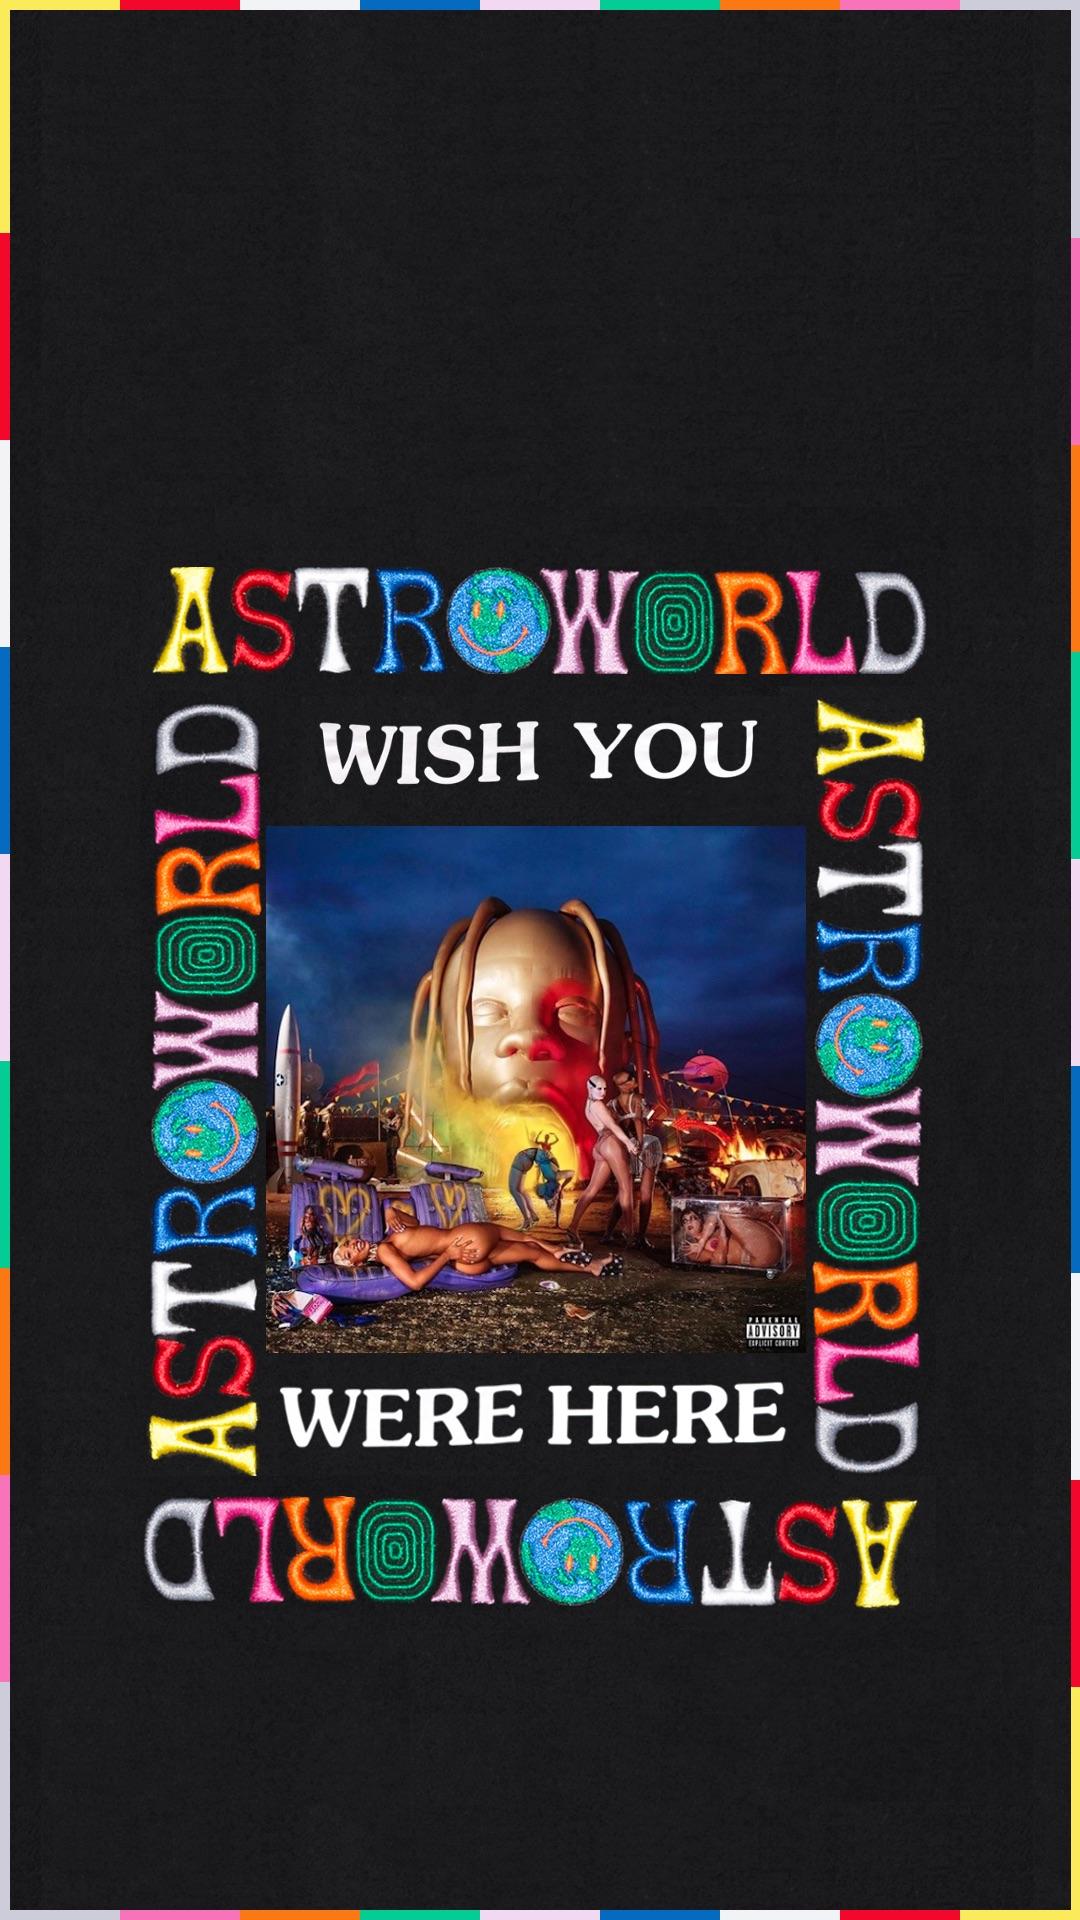 Astroworld Wallpaper I made a while ago [other] : r/travisscott